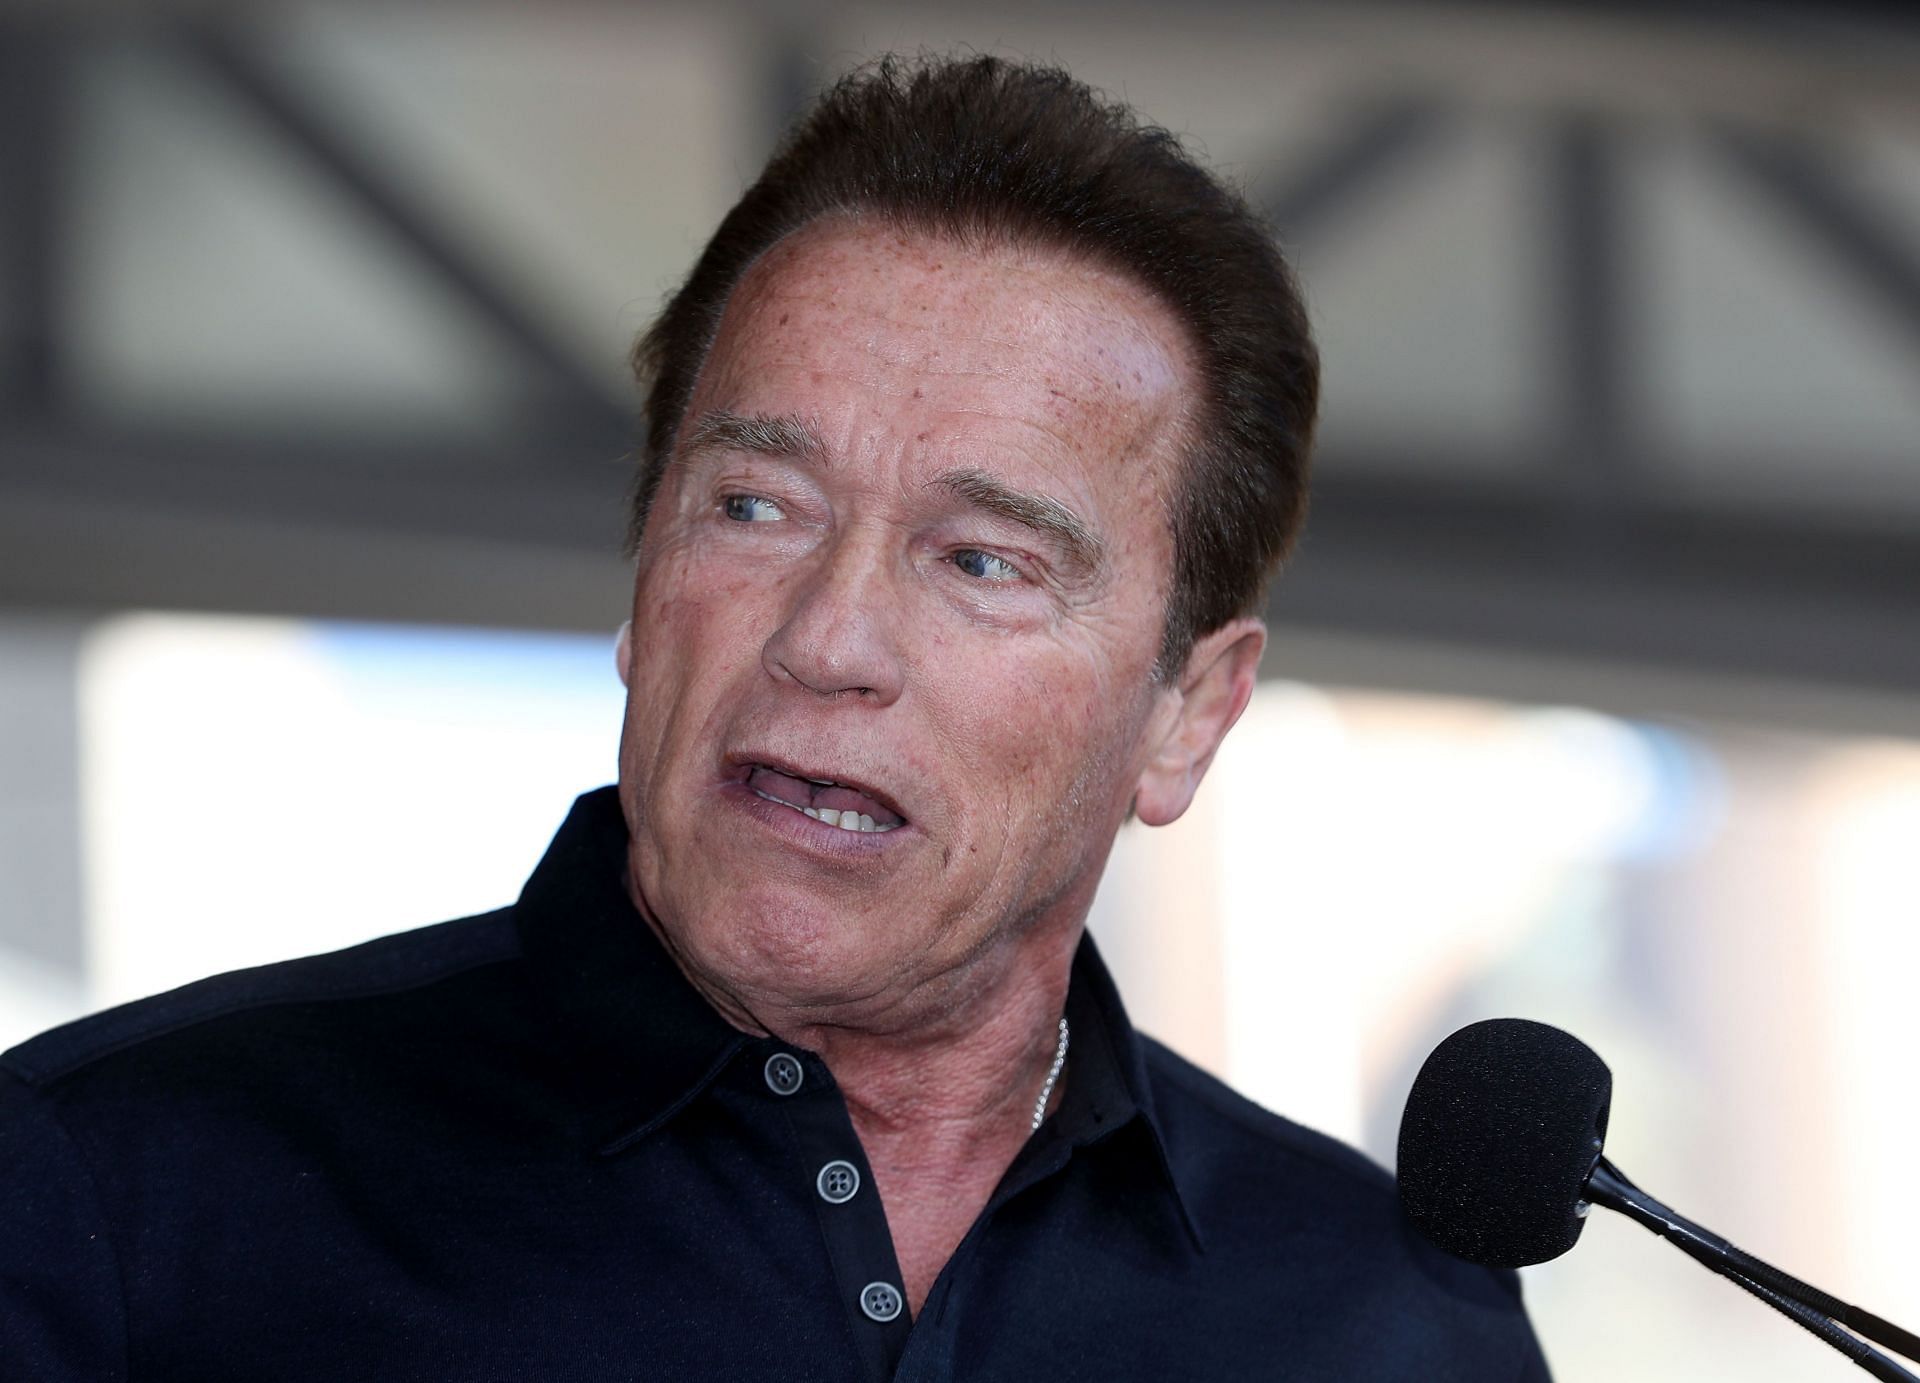 Arnold Schwarzenegger speaks on stage prior to the Arnold Family Walk as part of the 2017 Arnold Classic 